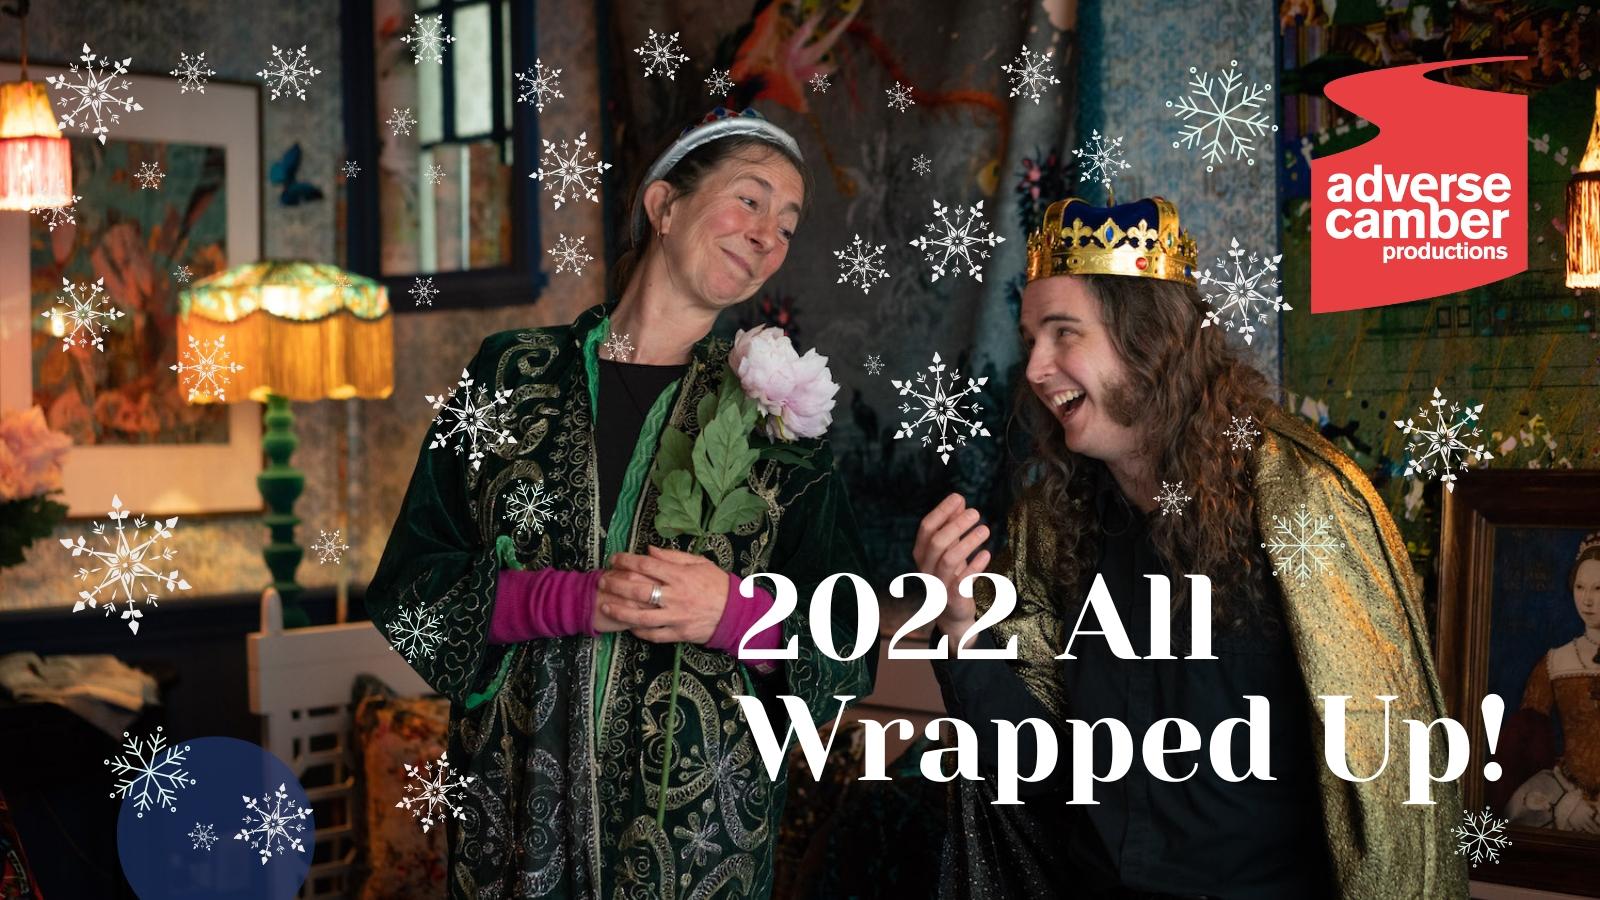 Storytellers Rachel Murray and Tim Ralphs in the Blackpop showroom wearing crowns with the text '2022 all wrapped up!'